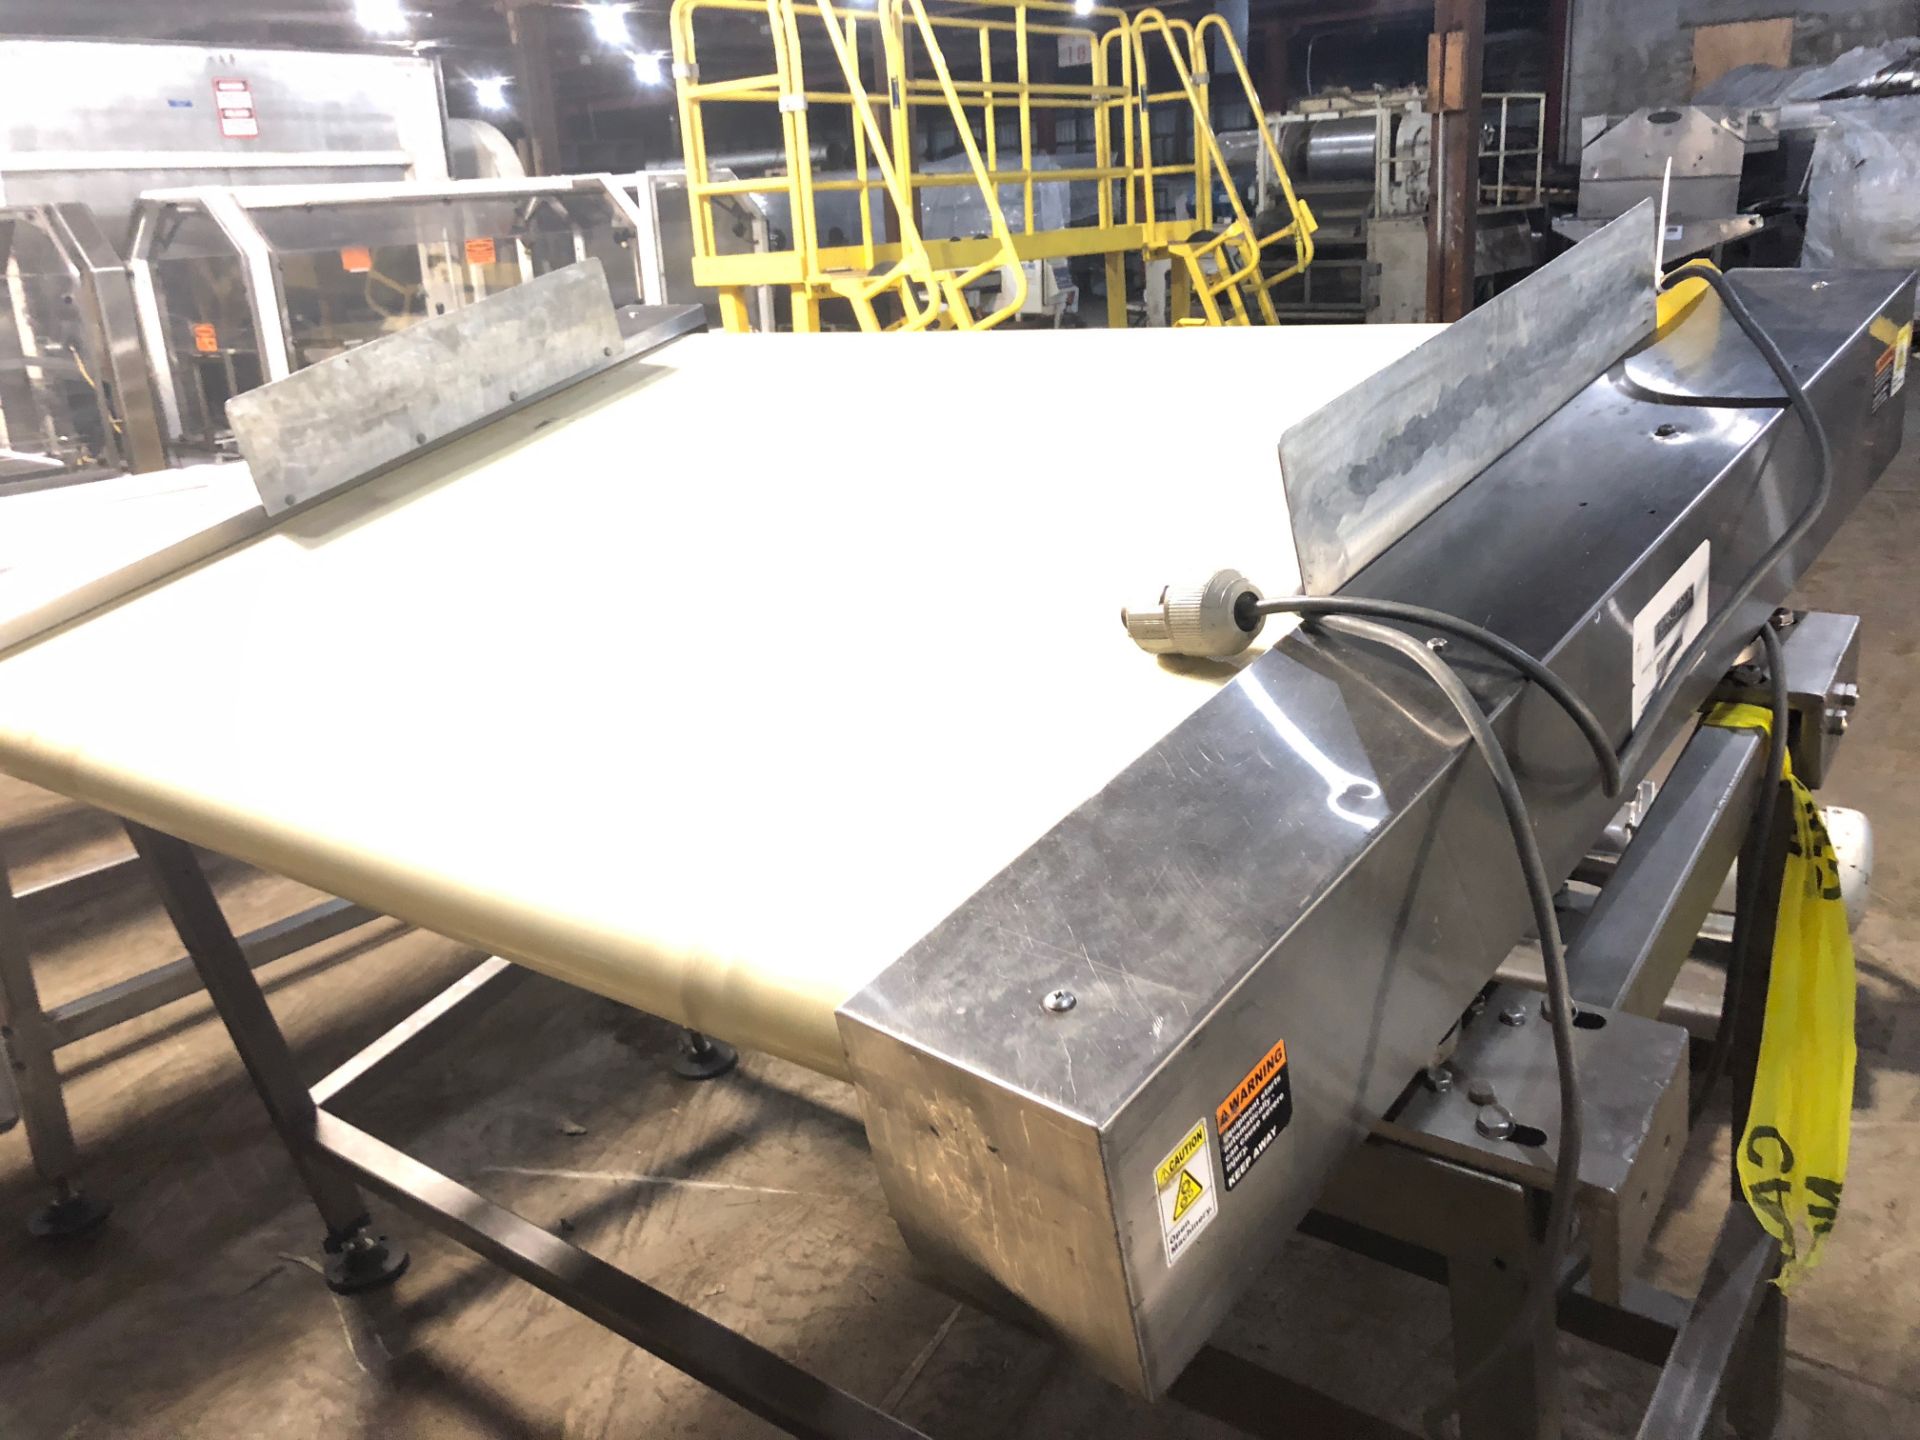 Spreader Stainless Frame Conveyor, 64 in. w x 50 in. l, Serial #19670 Rigging Fee for the item: $50 - Image 2 of 4